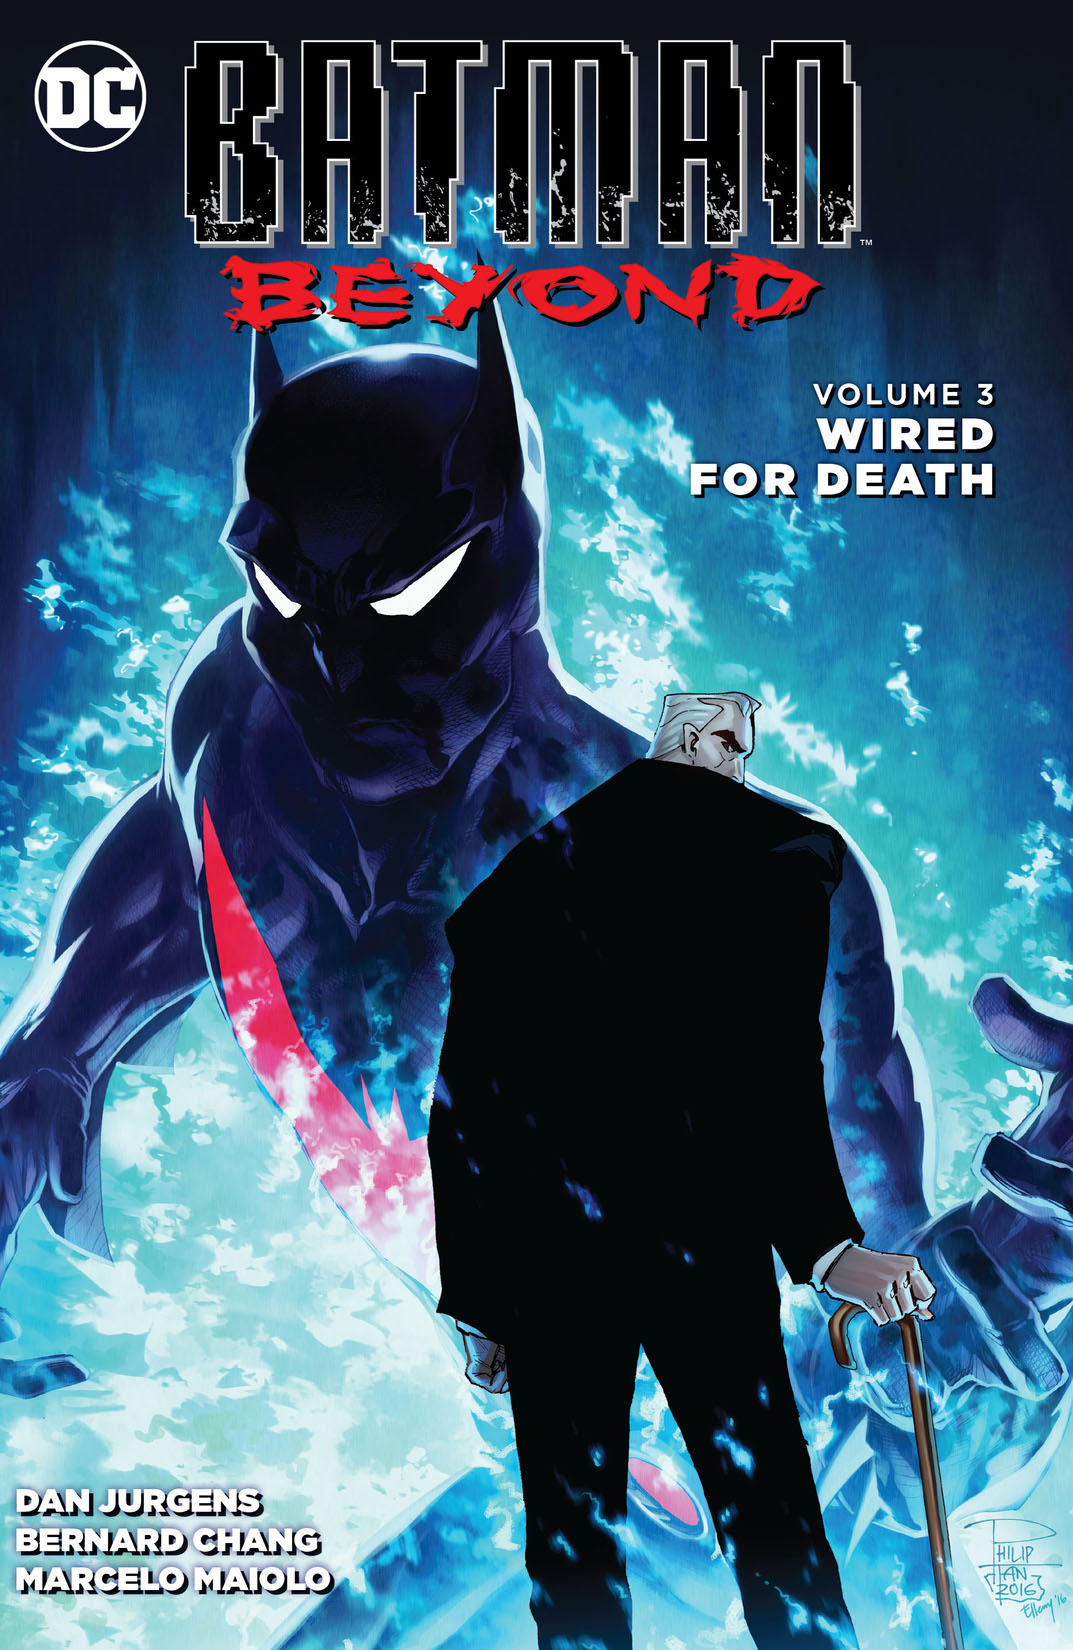 Batman Beyond Vol. 3: Wired for Death preview images